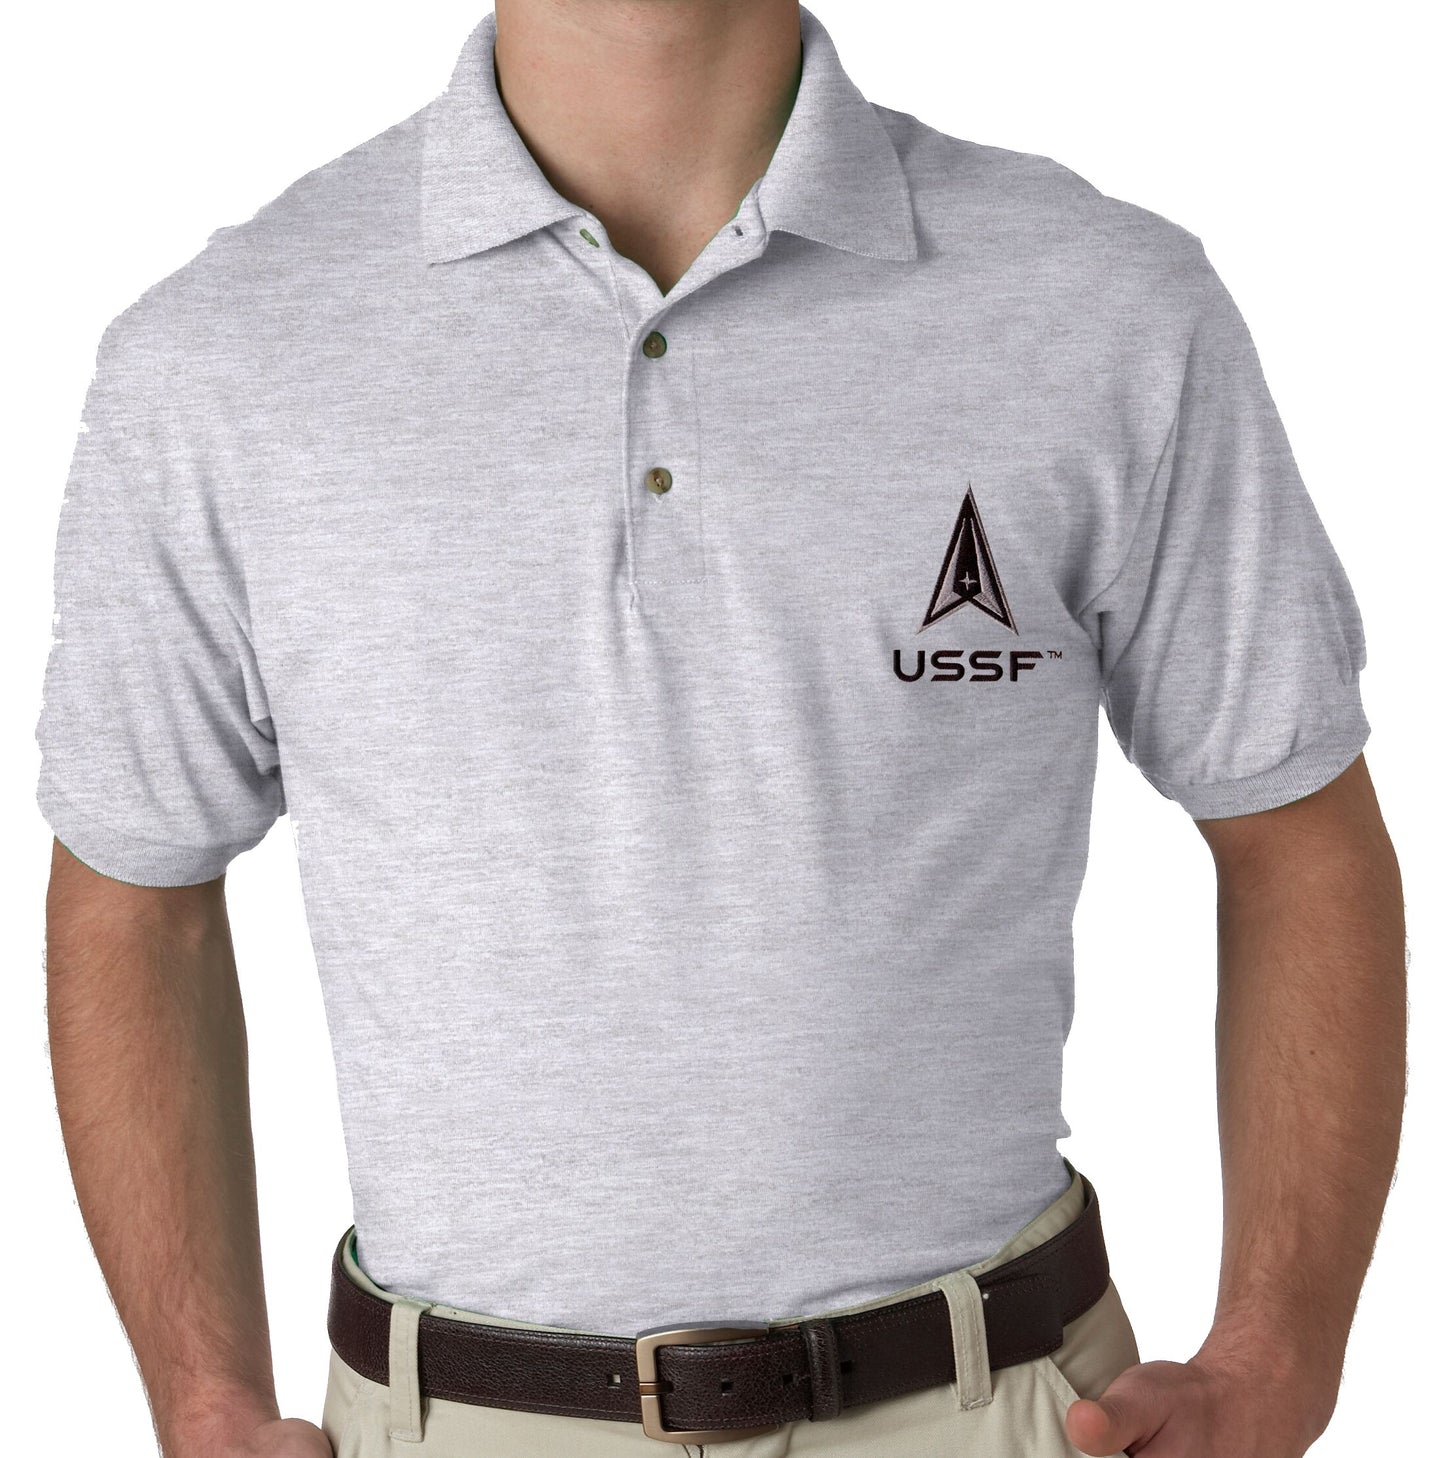 US Space Force USSF Polo Shirt